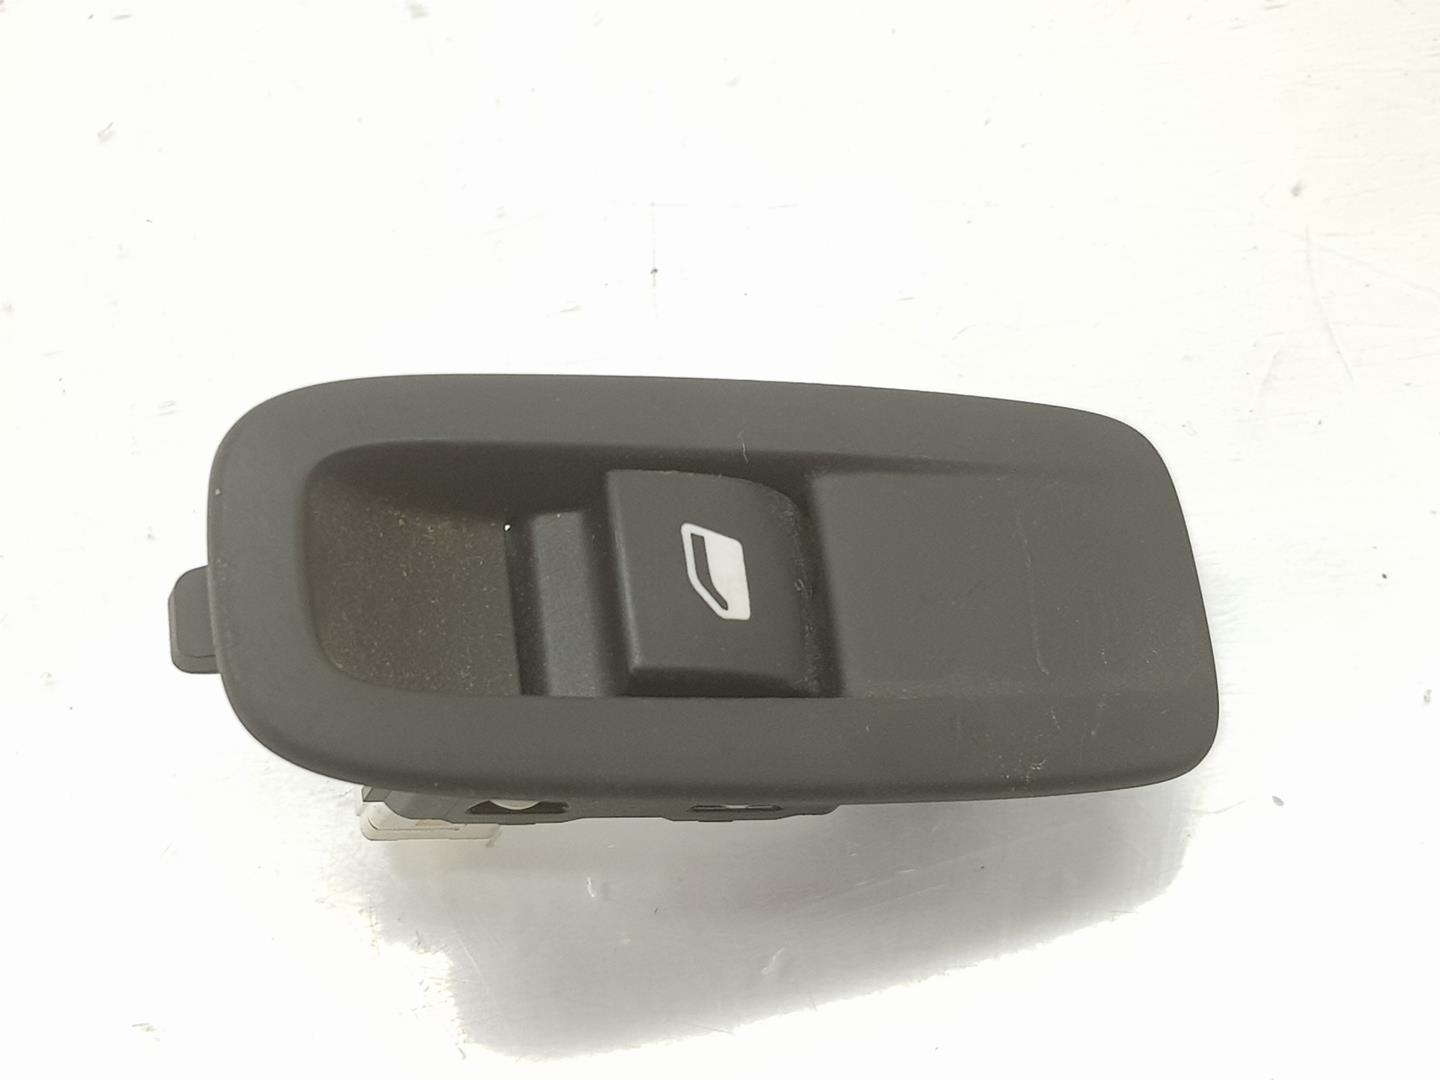 CITROËN C4 Picasso 2 generation (2013-2018) Rear Right Door Window Control Switch 96762292ZD, 98007337ZD 24193748